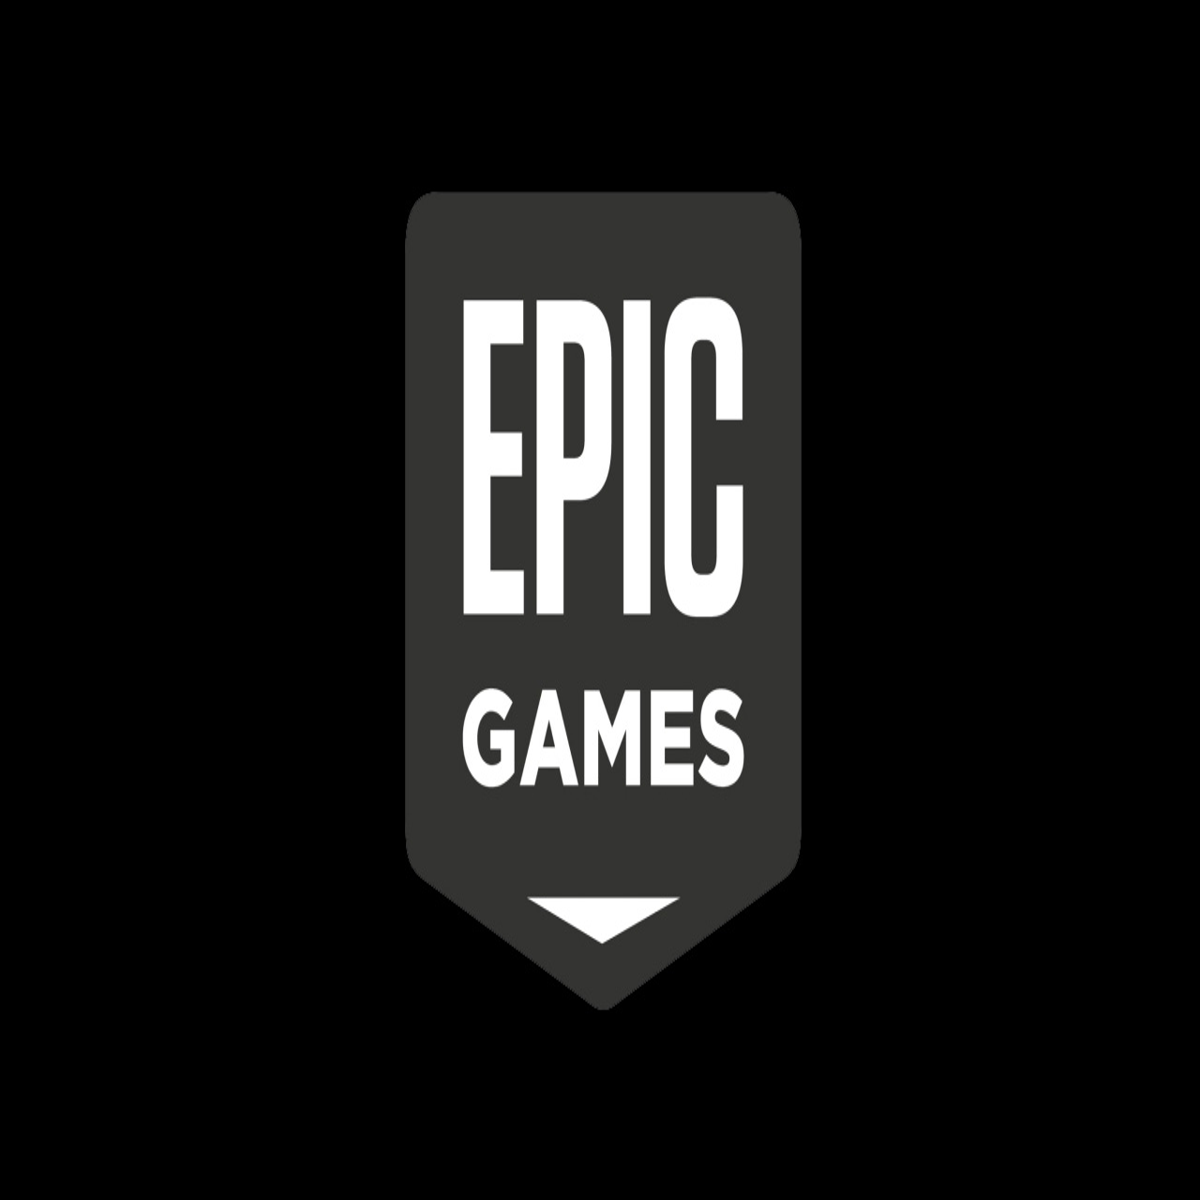 Google loses Epic Games antitrust trial: what does it mean for